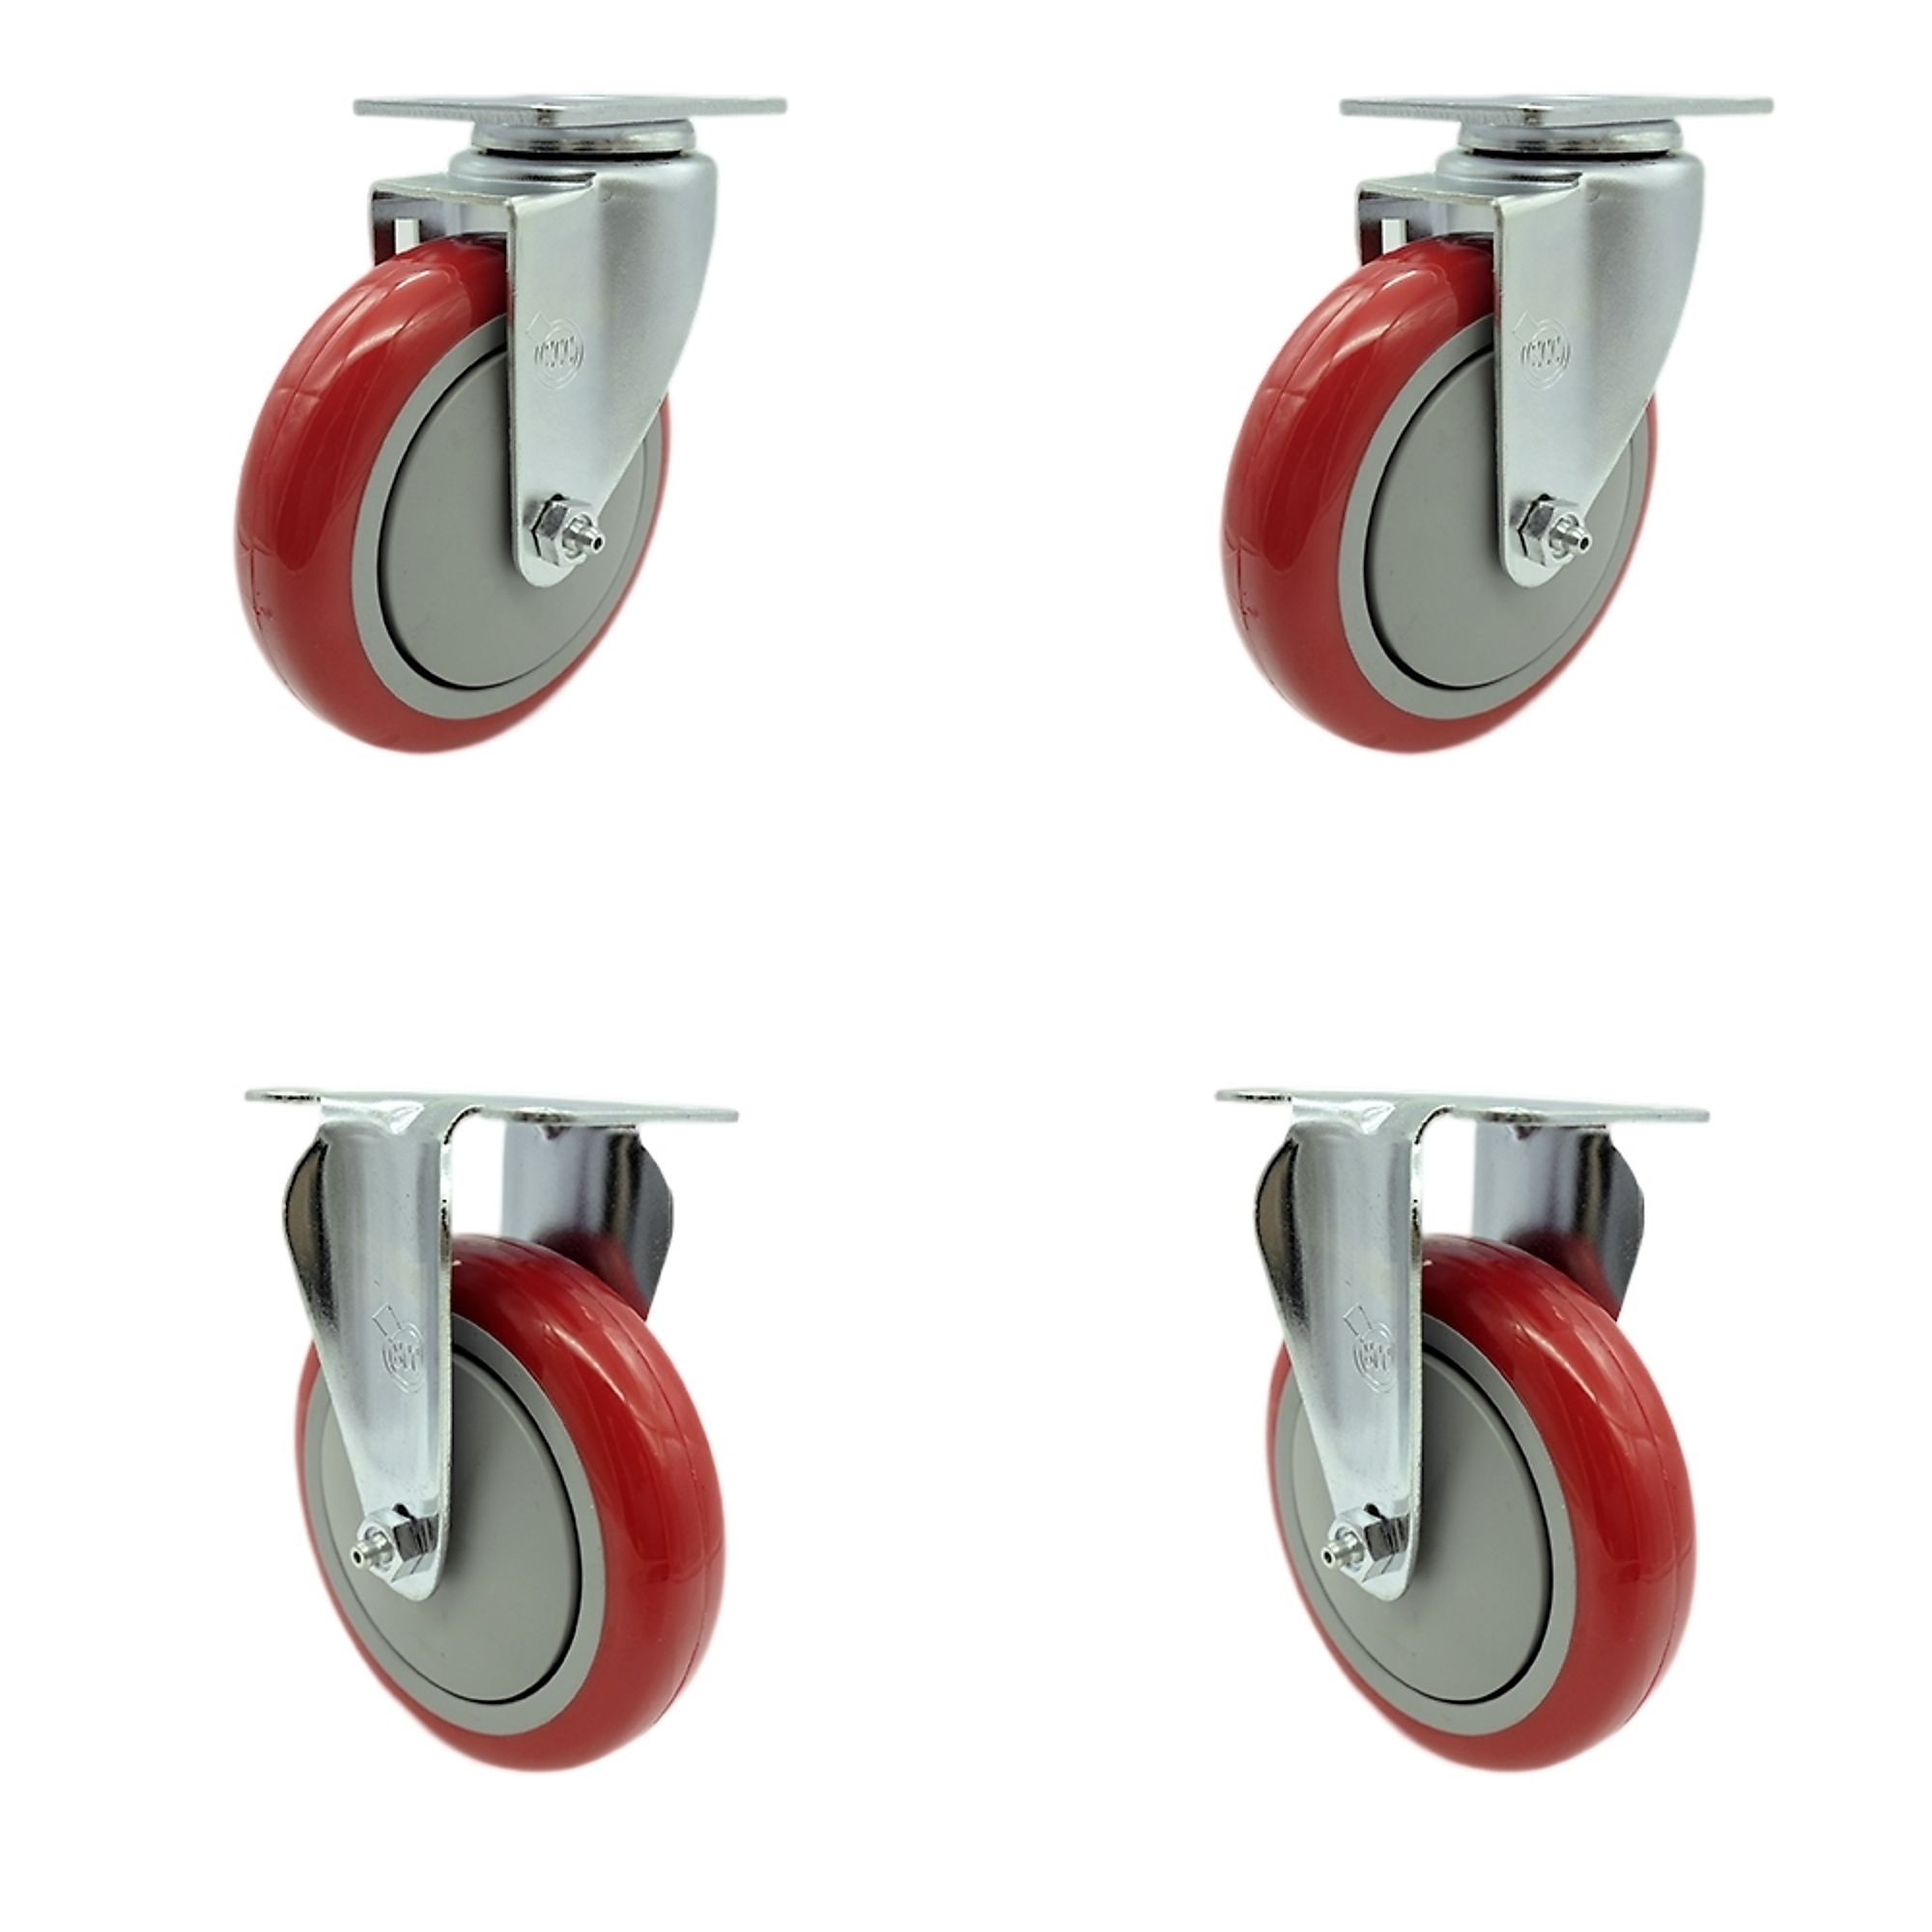 Service Caster, 5Inch x 1 1/4Inch Plate Casters, Wheel Diameter 5 in, Caster Type Swivel, Package (qty.) 4, Model SCC-20S514-PPUB-RED-2-R514-2 -  670533853291